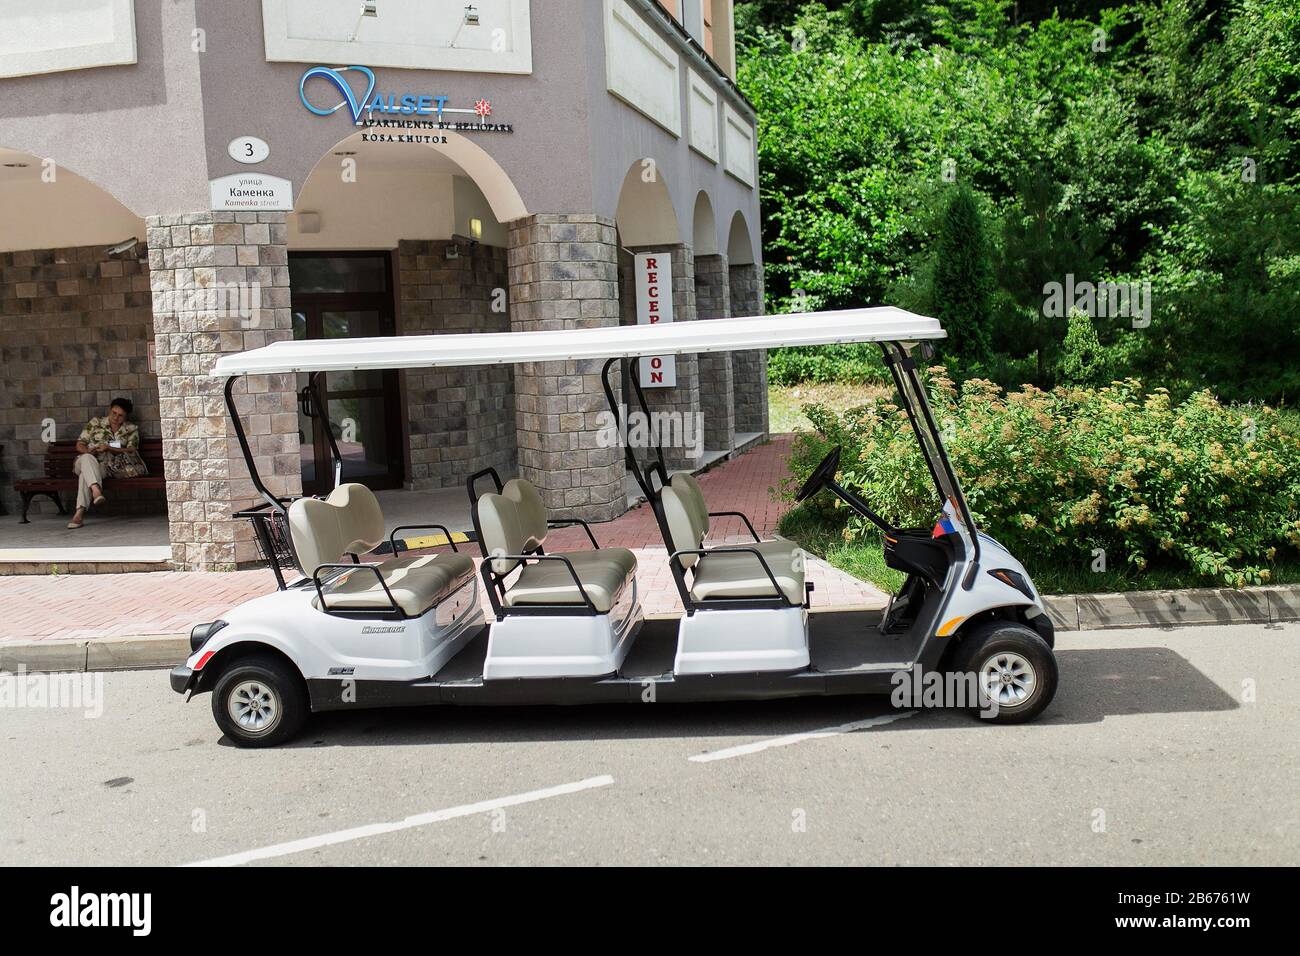 25 JULY 2016 Rosa KHUTOR, SOCHI, RUSSIA: car for transfer of tourists standing near hotel Stock Photo